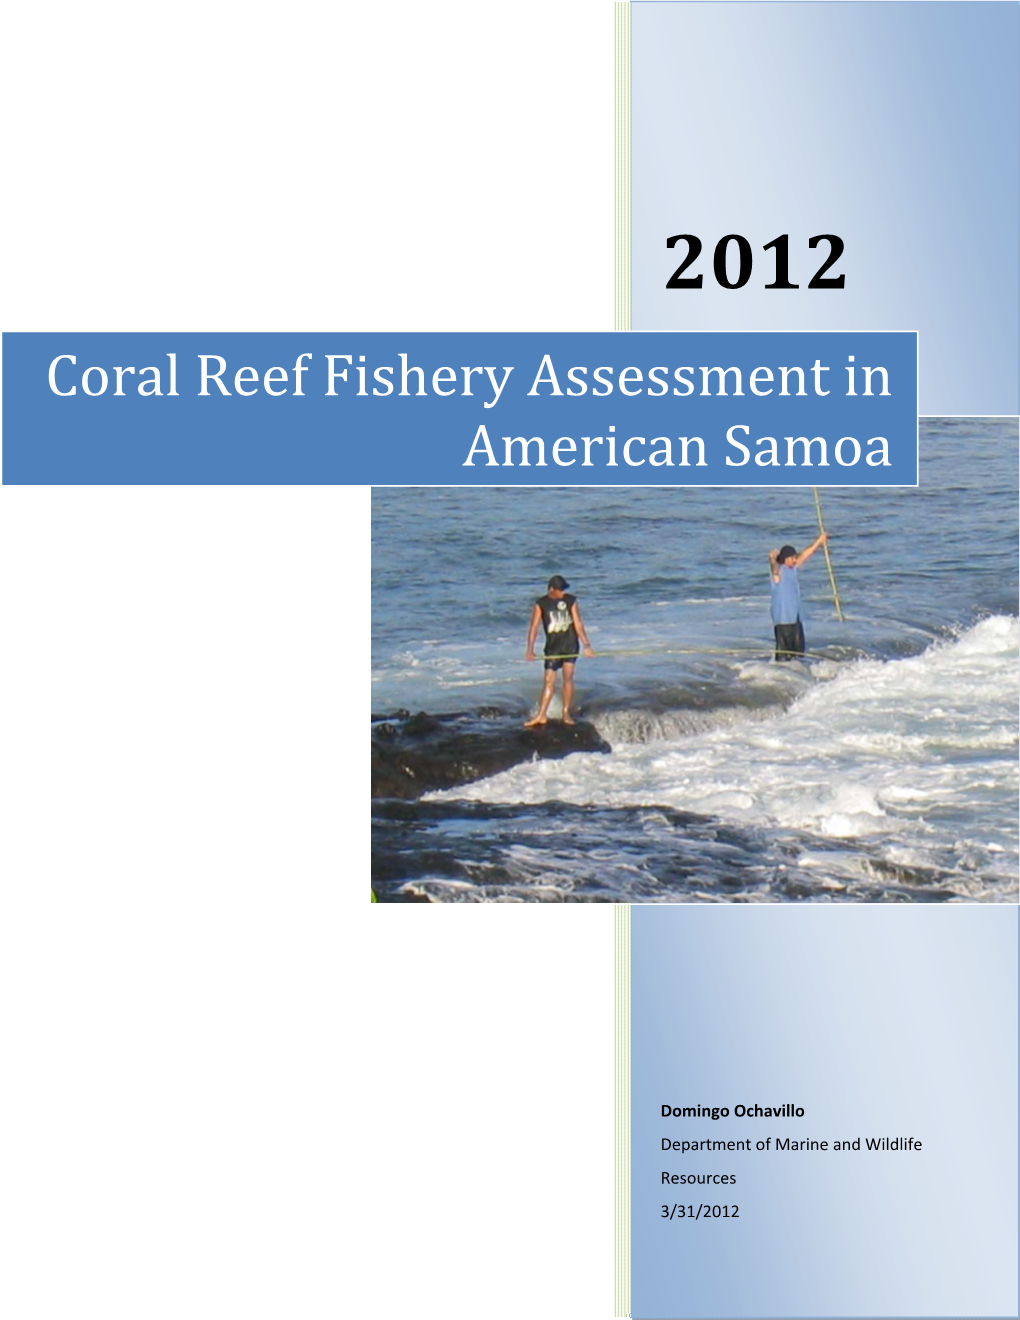 Coral Reef Fishery Assessment in American Samoa